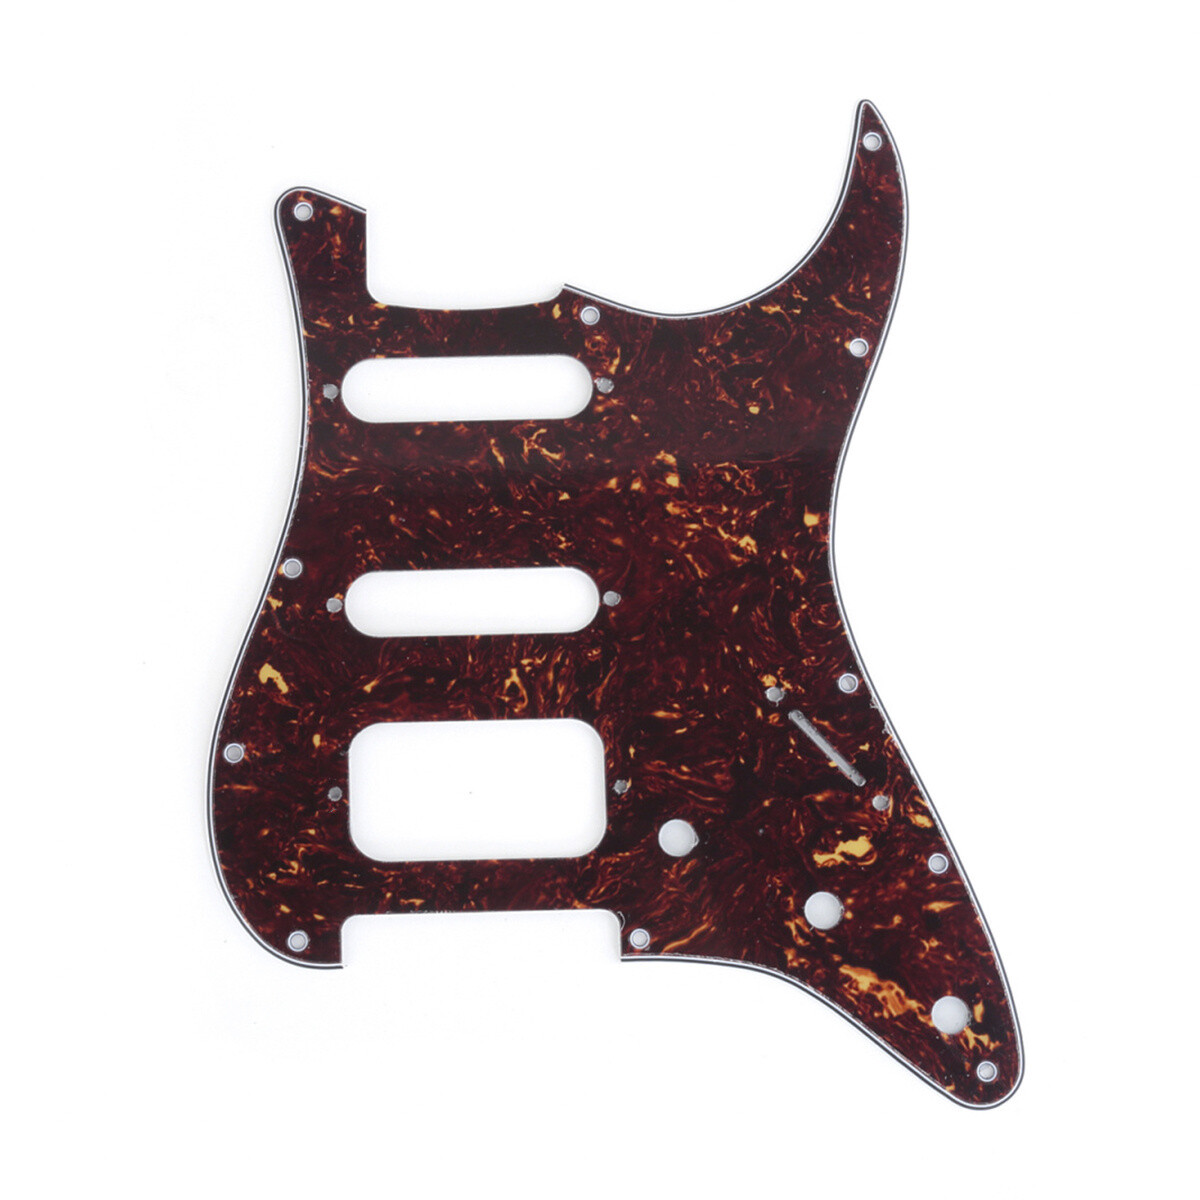 Brio HSS Strat® 11 Hole, Rounded Pickup Corners, Brown Tortoise 4 Ply